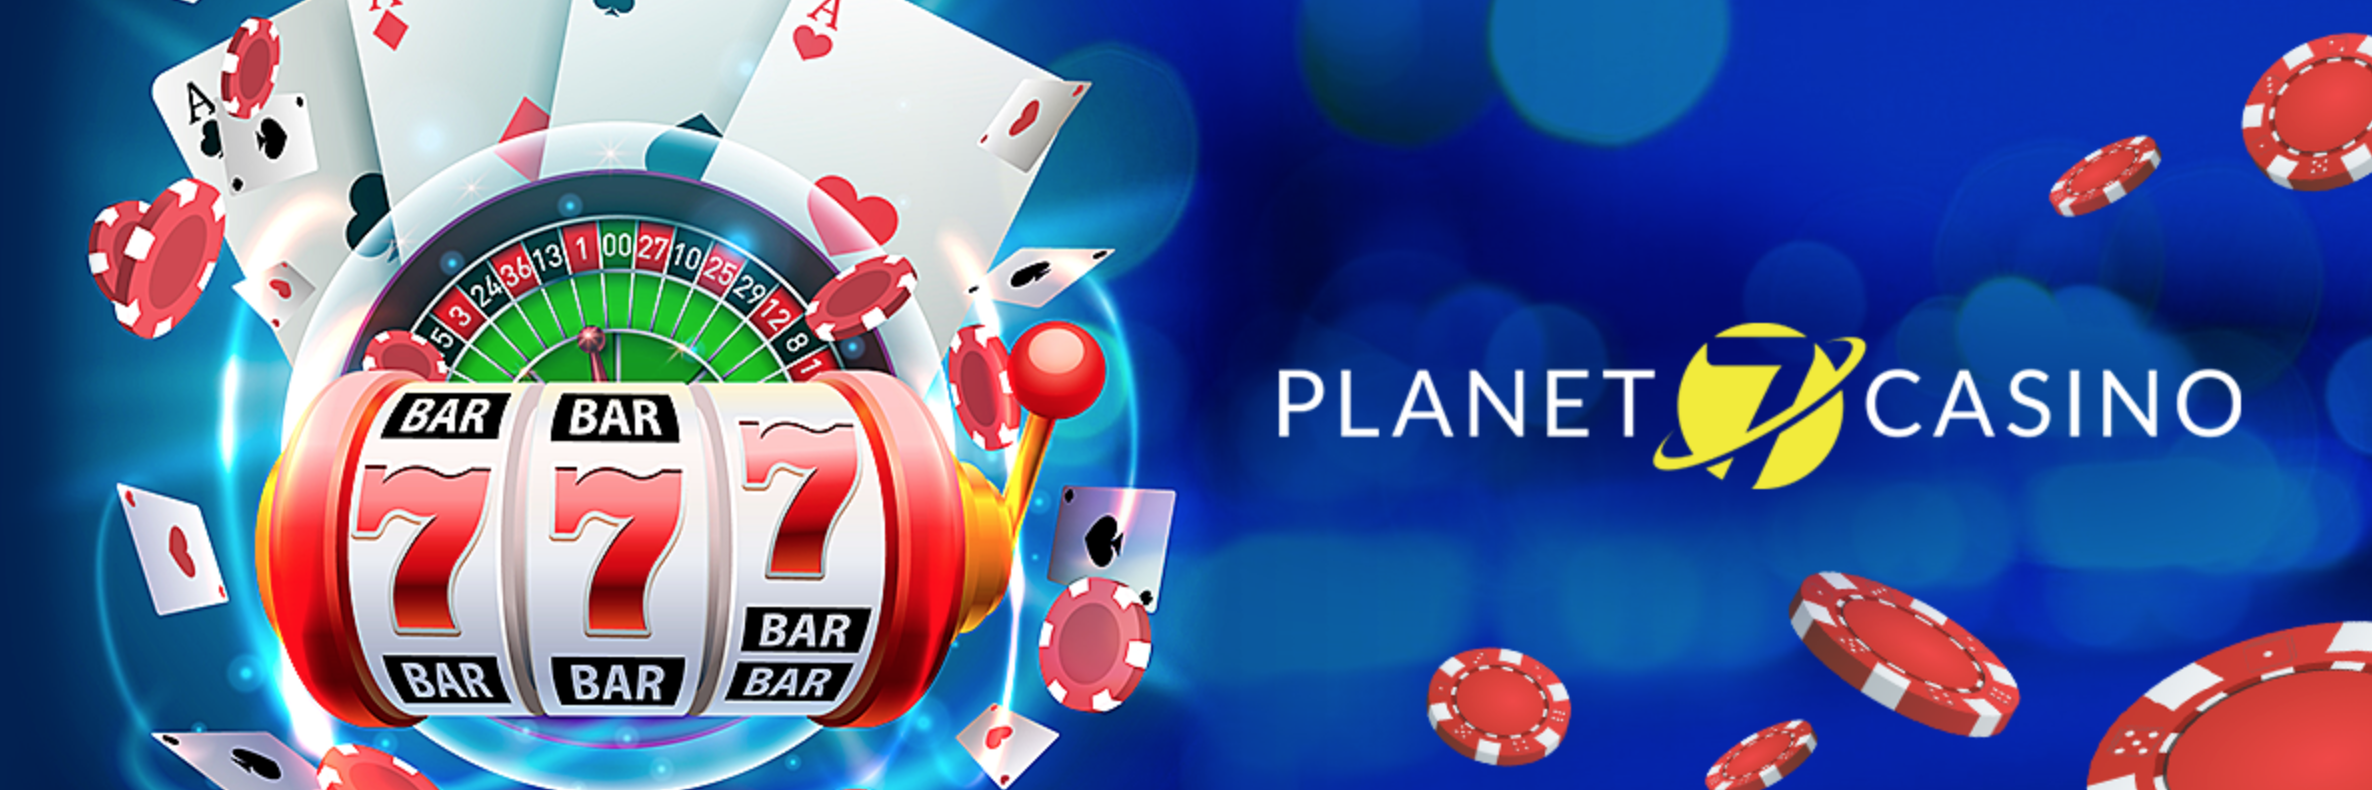 Planet 7 Casino Payout